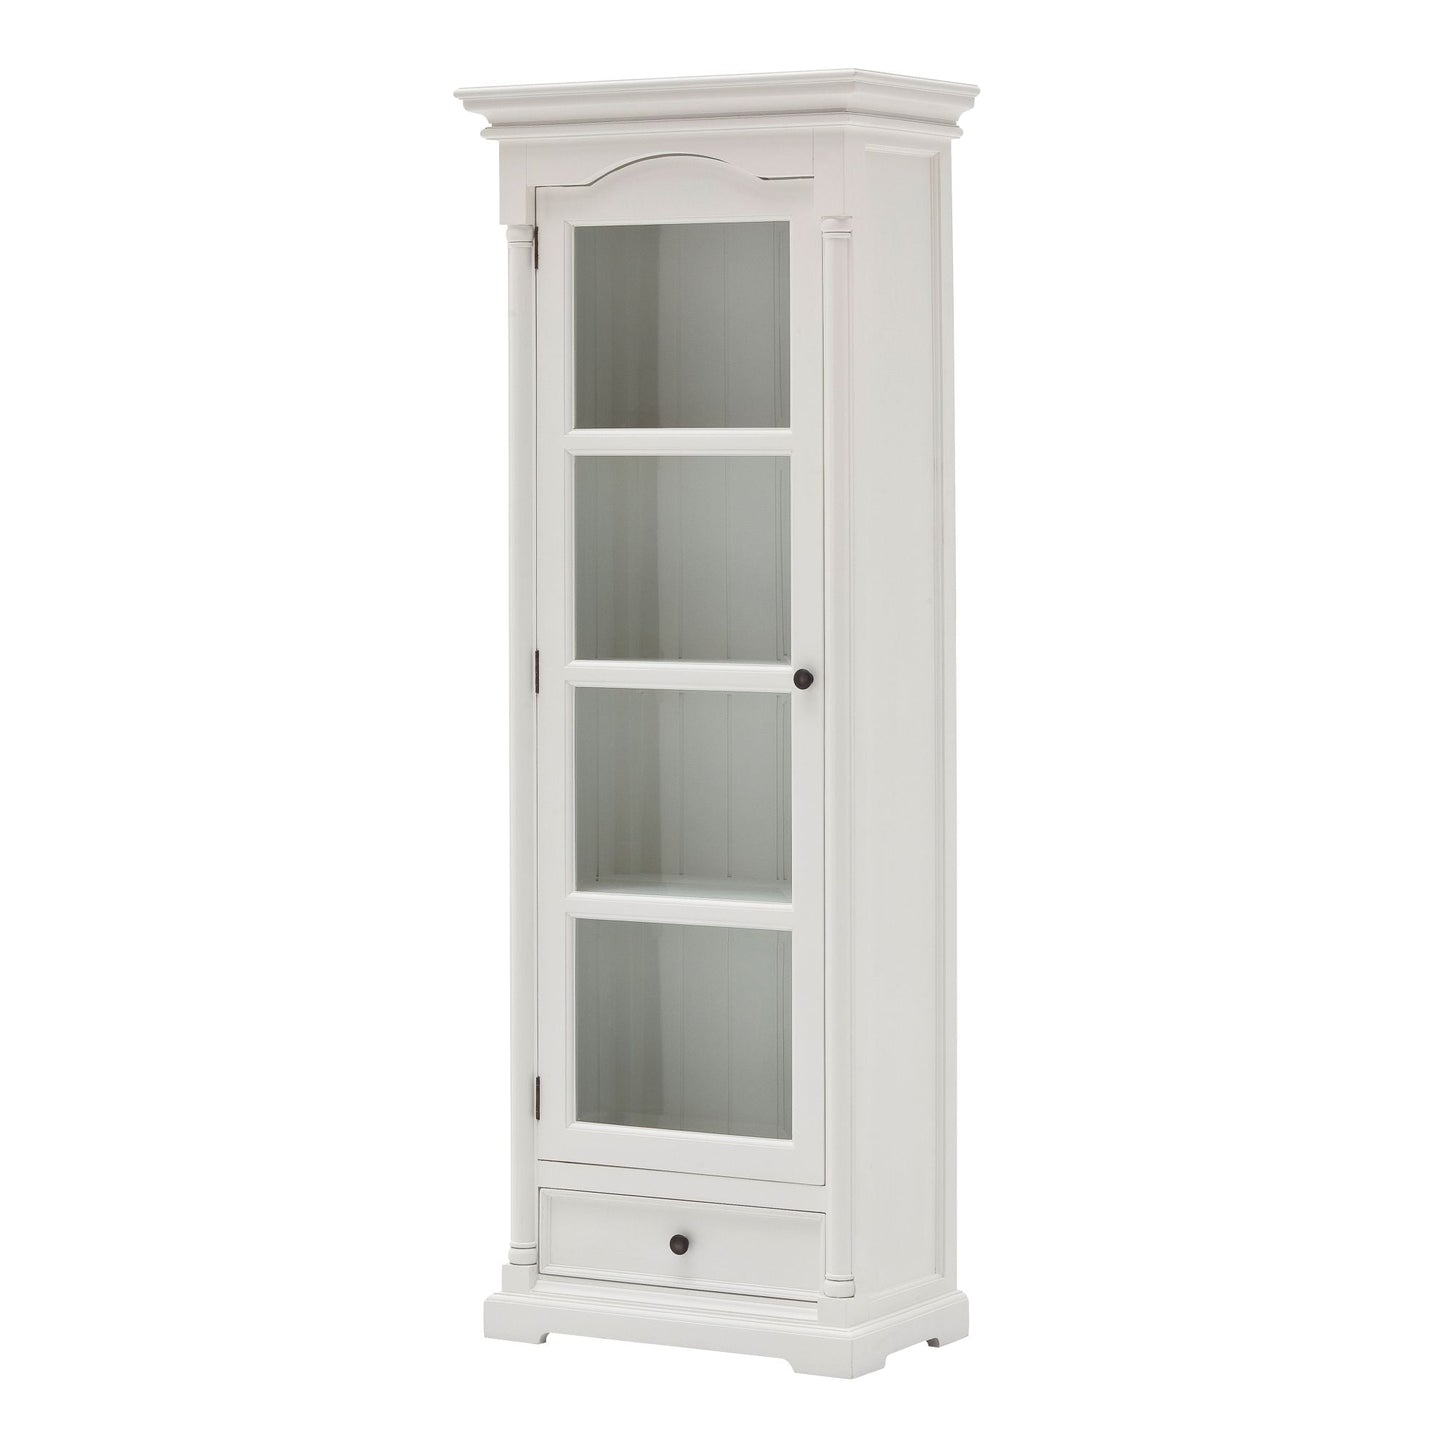 NovaSolo Provence 28" Classic White Mahogany Display Cabinet With 1 Glass Door & 1 Drawer